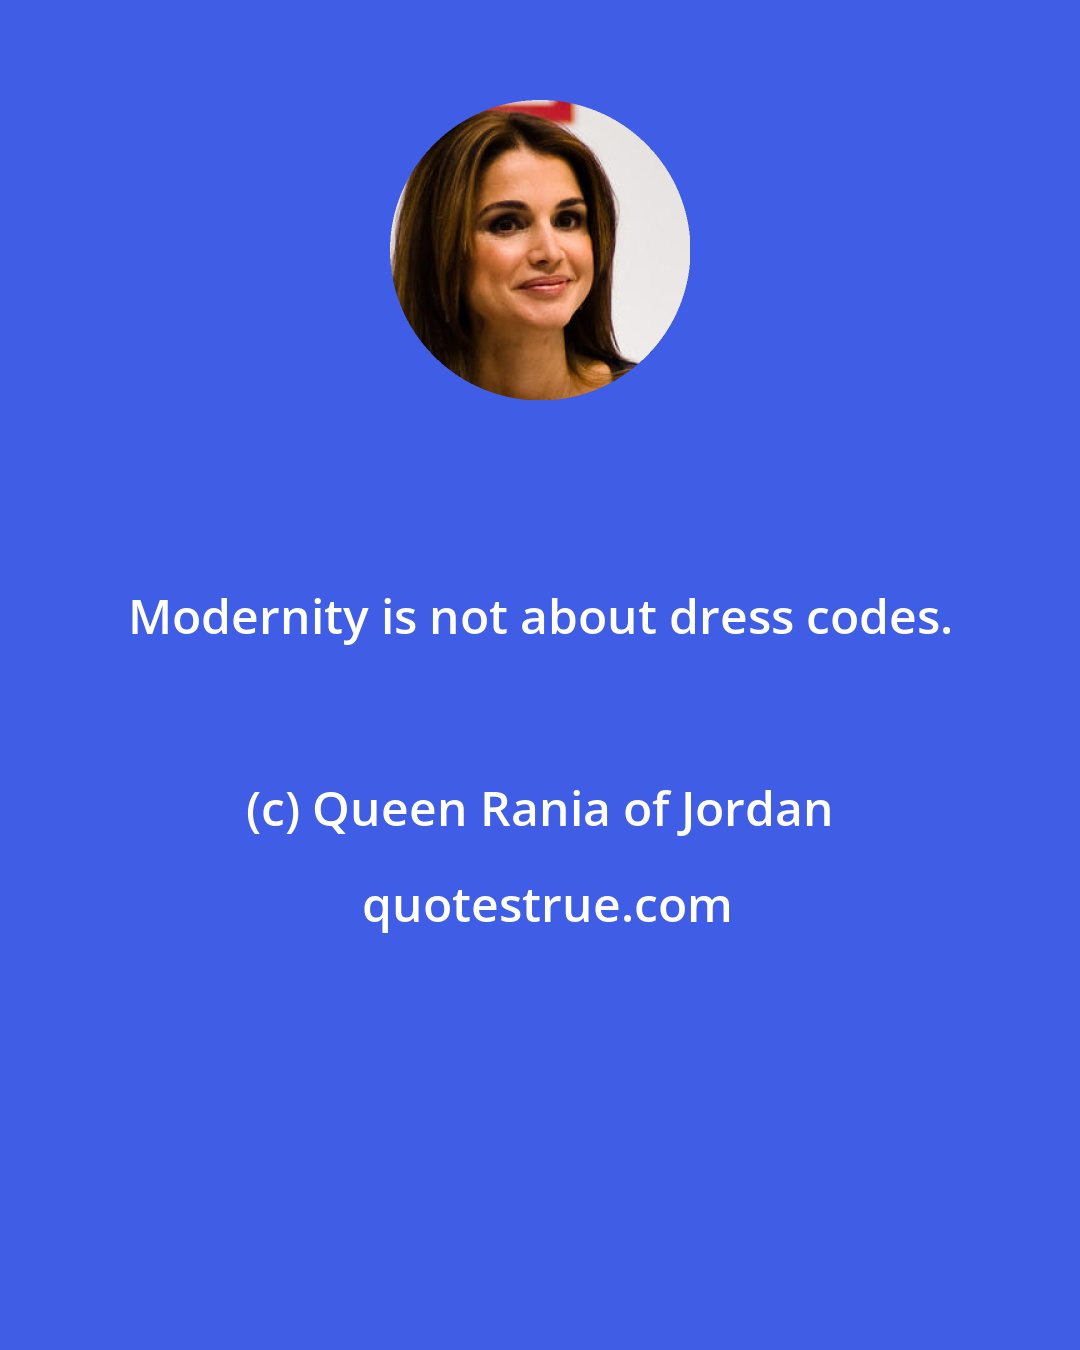 Queen Rania of Jordan: Modernity is not about dress codes.